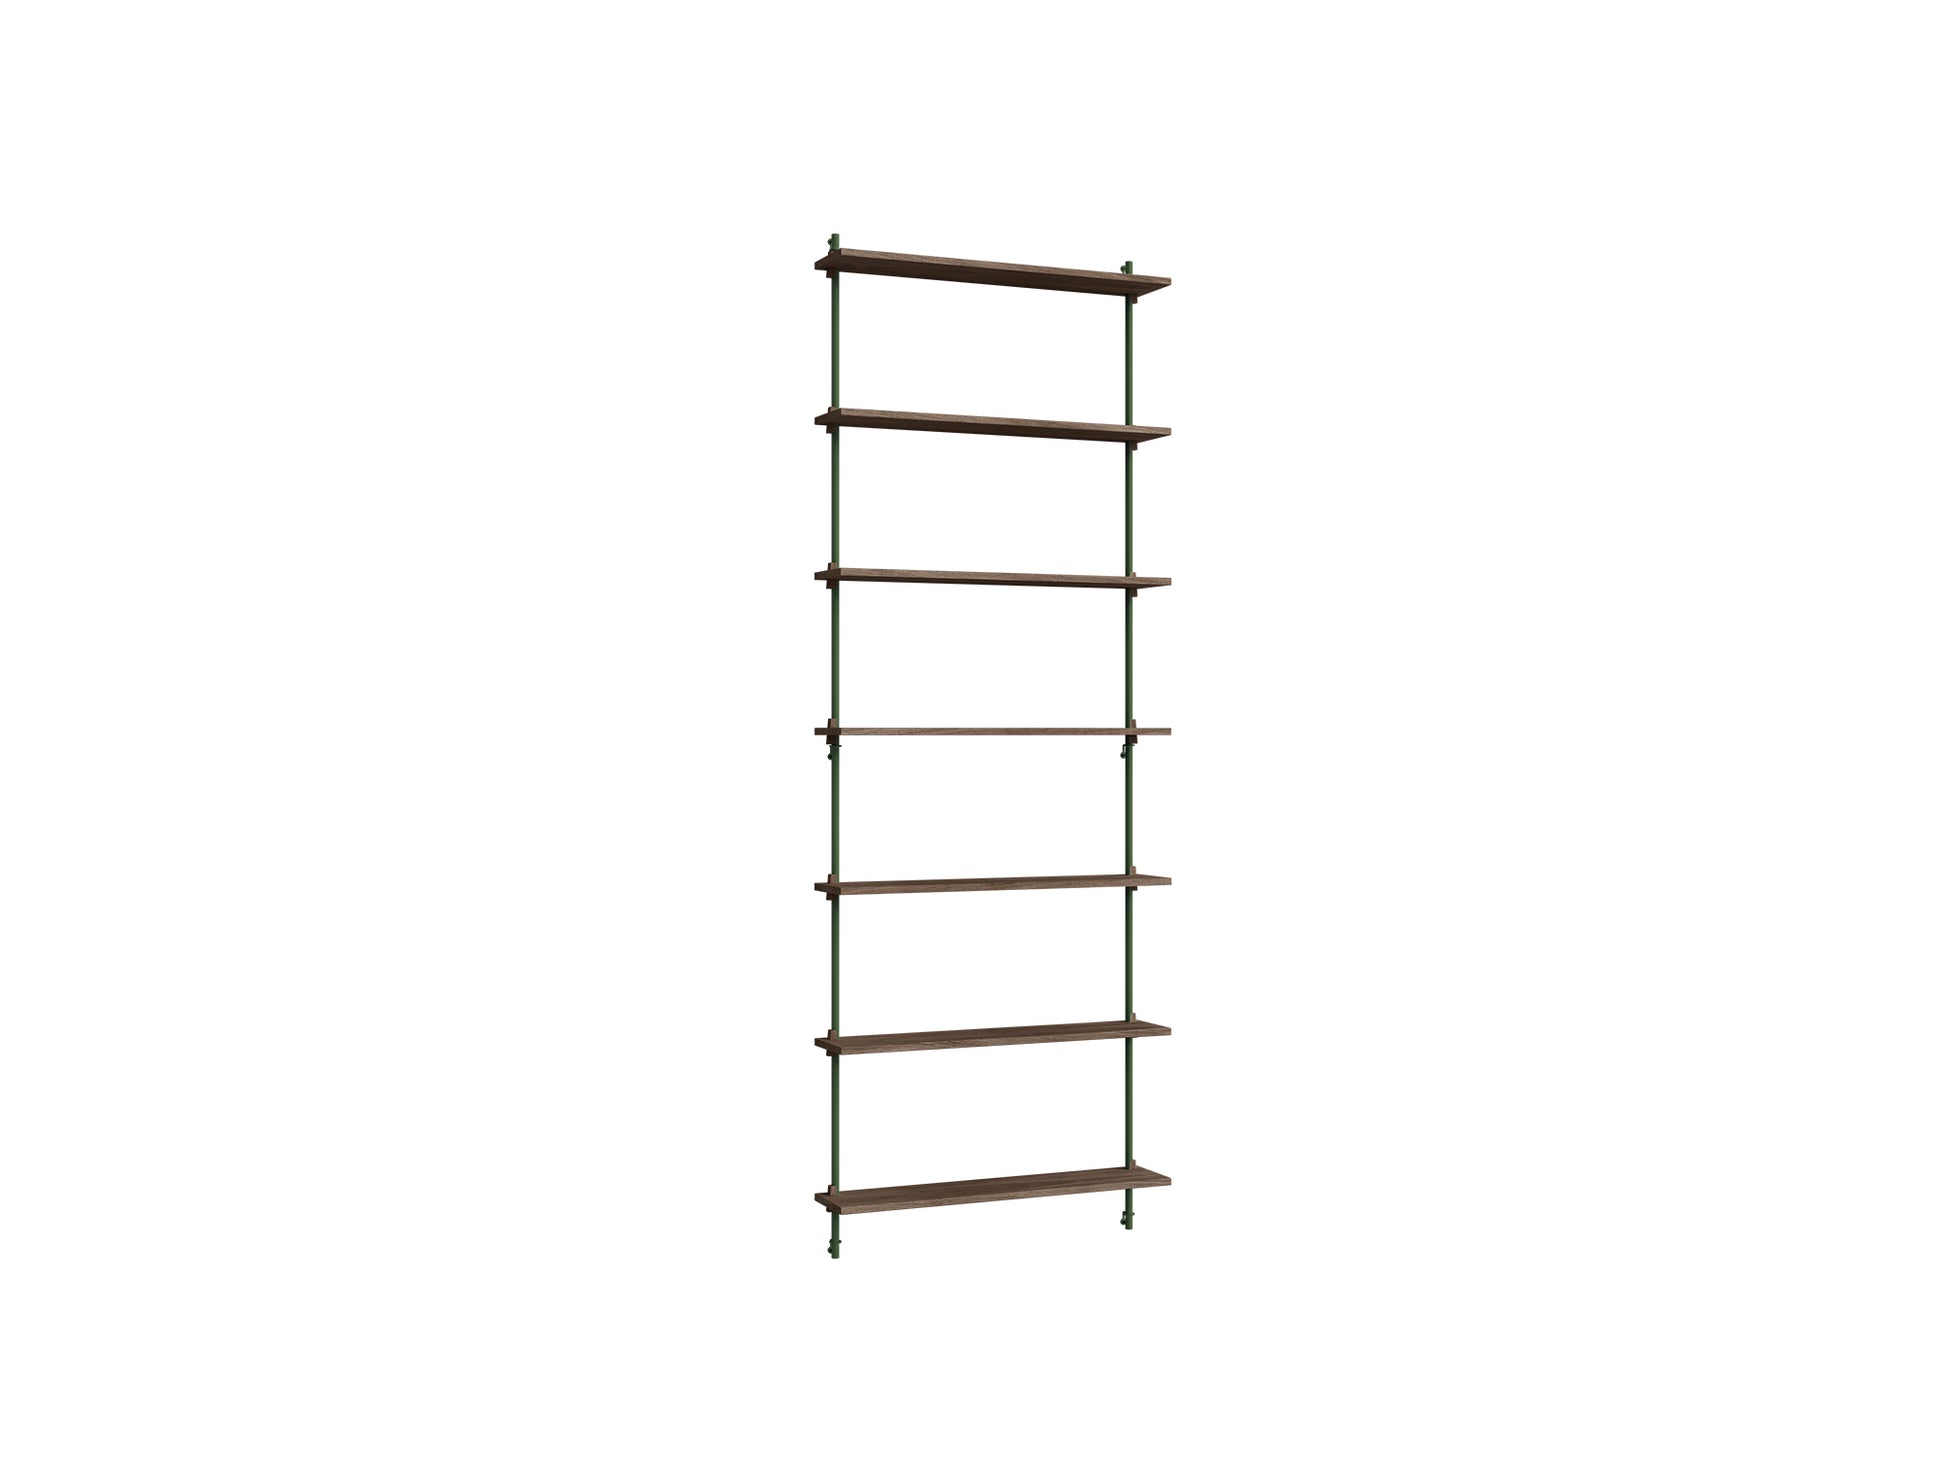 Wall Shelving System Sets (230 cm) by Moebe - WS.230.1 / Pine Green Uprights / Smoked Oak